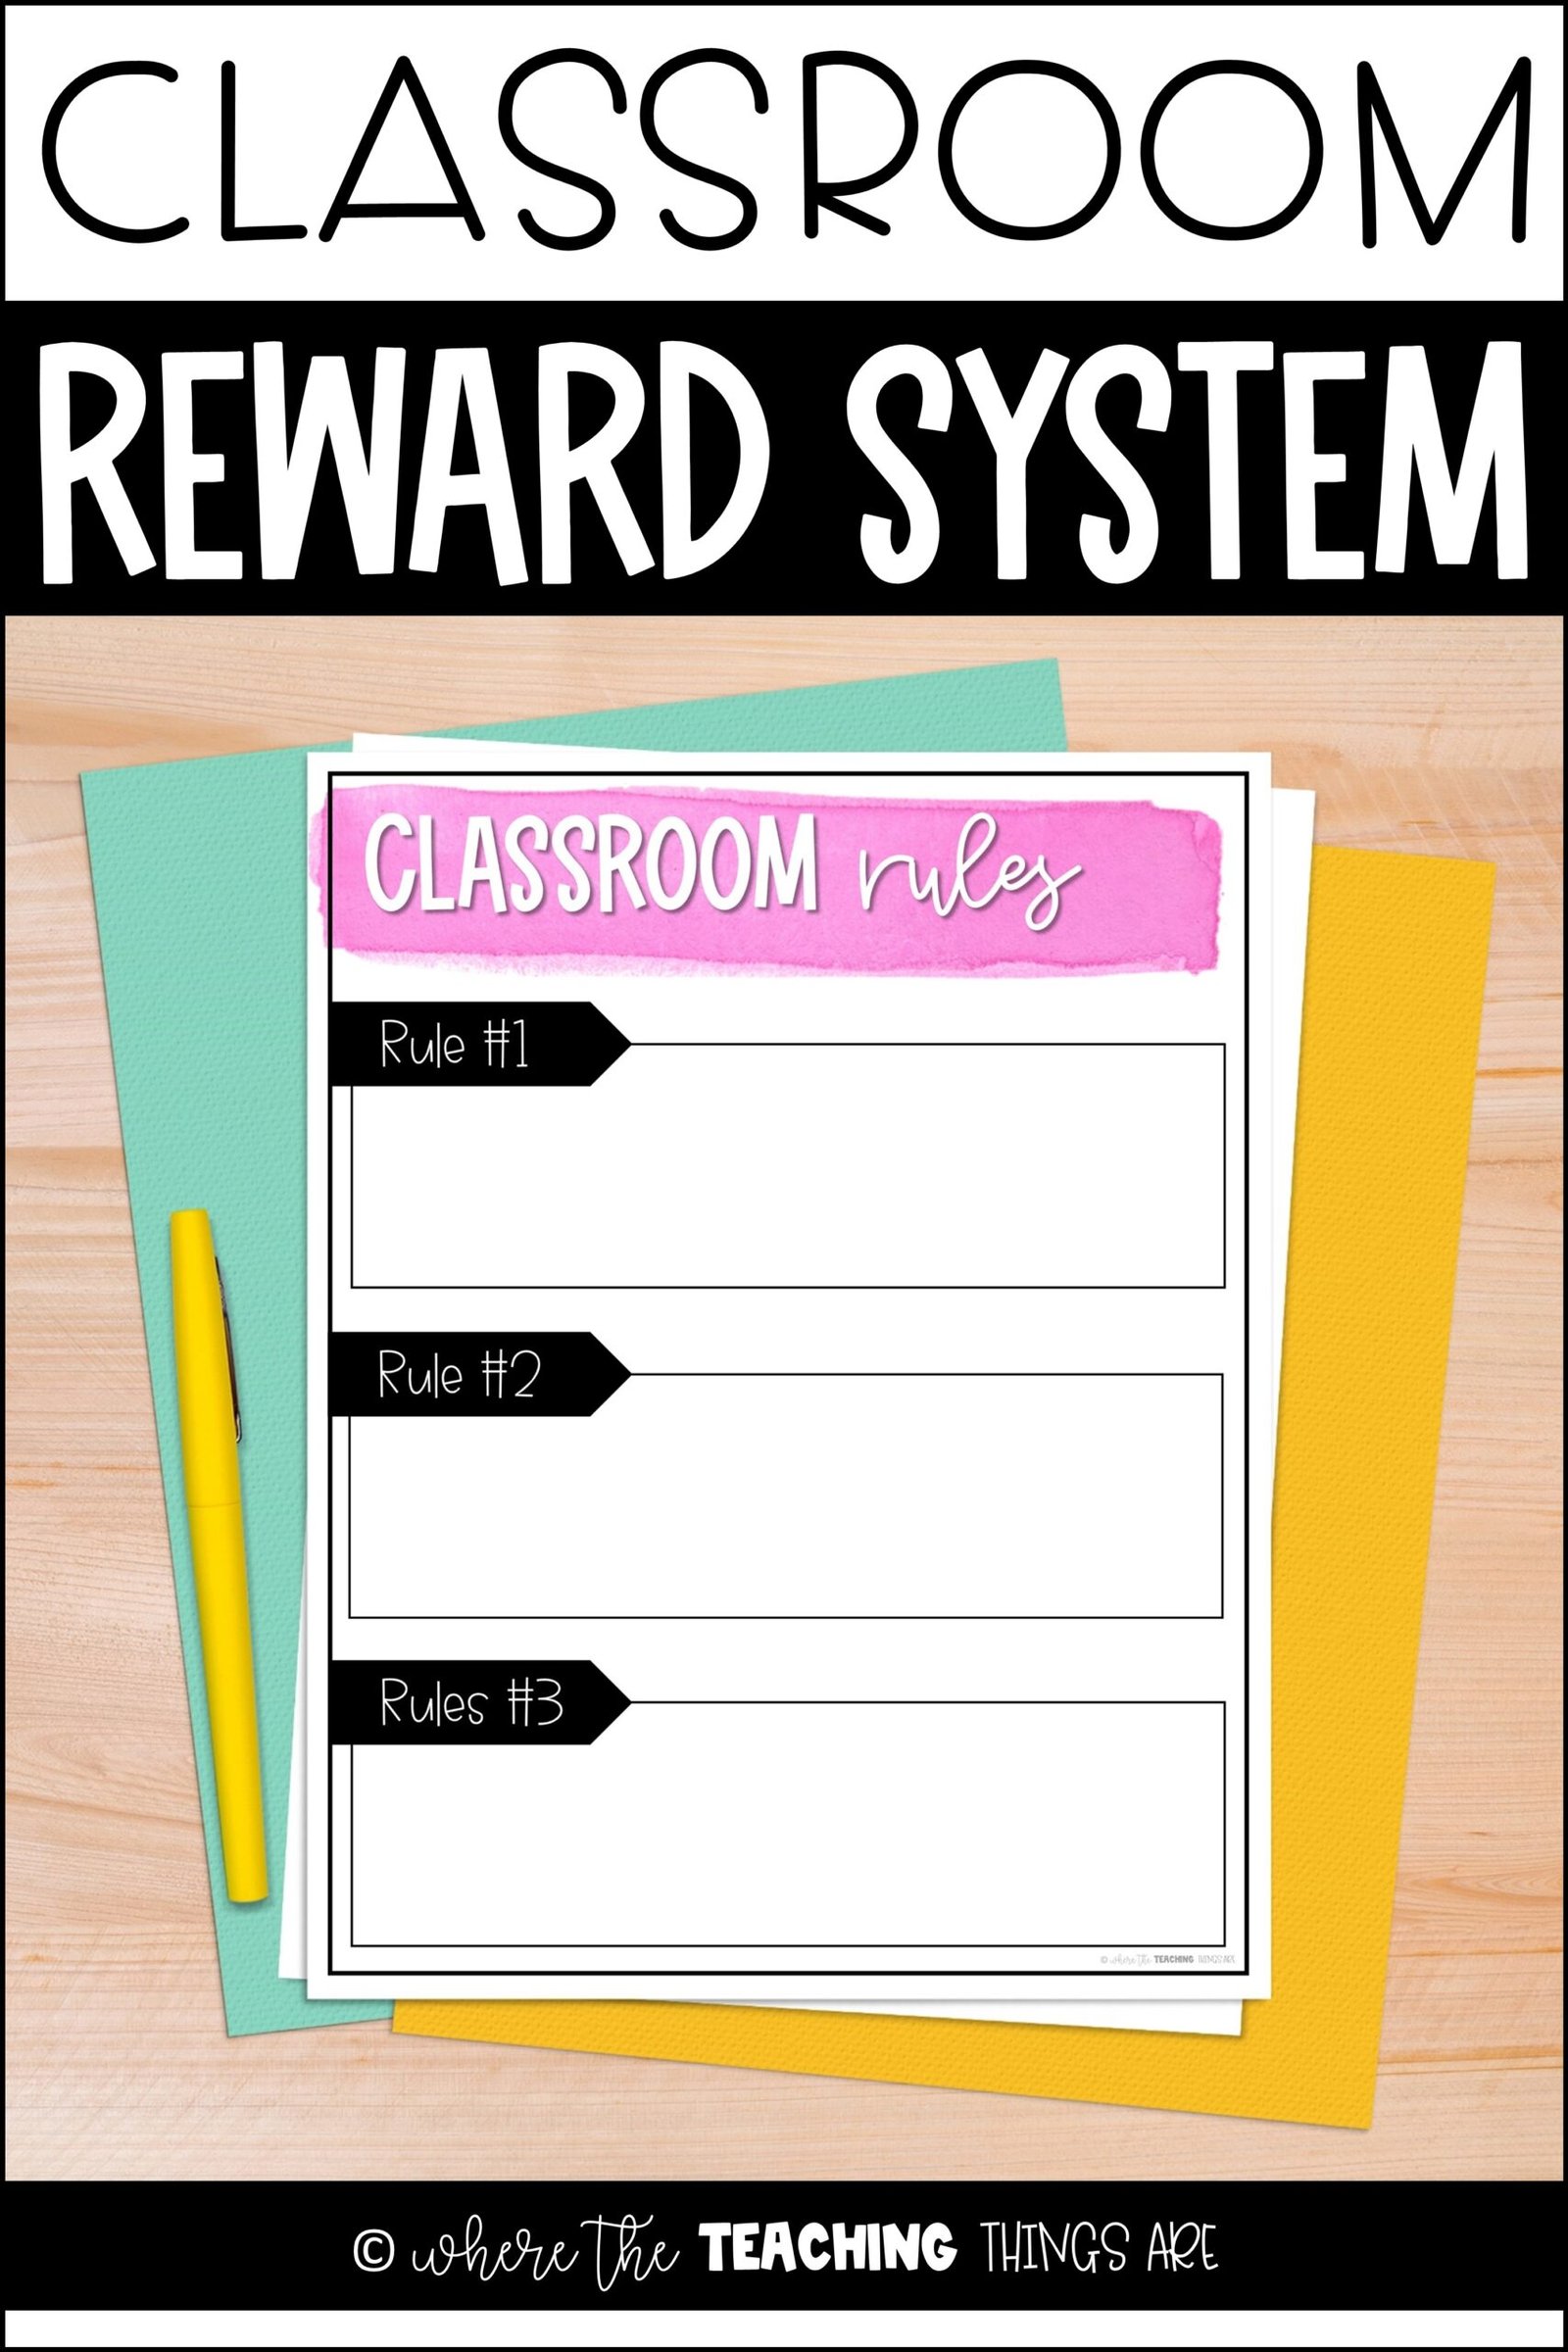 Classroom Rules and Rewards